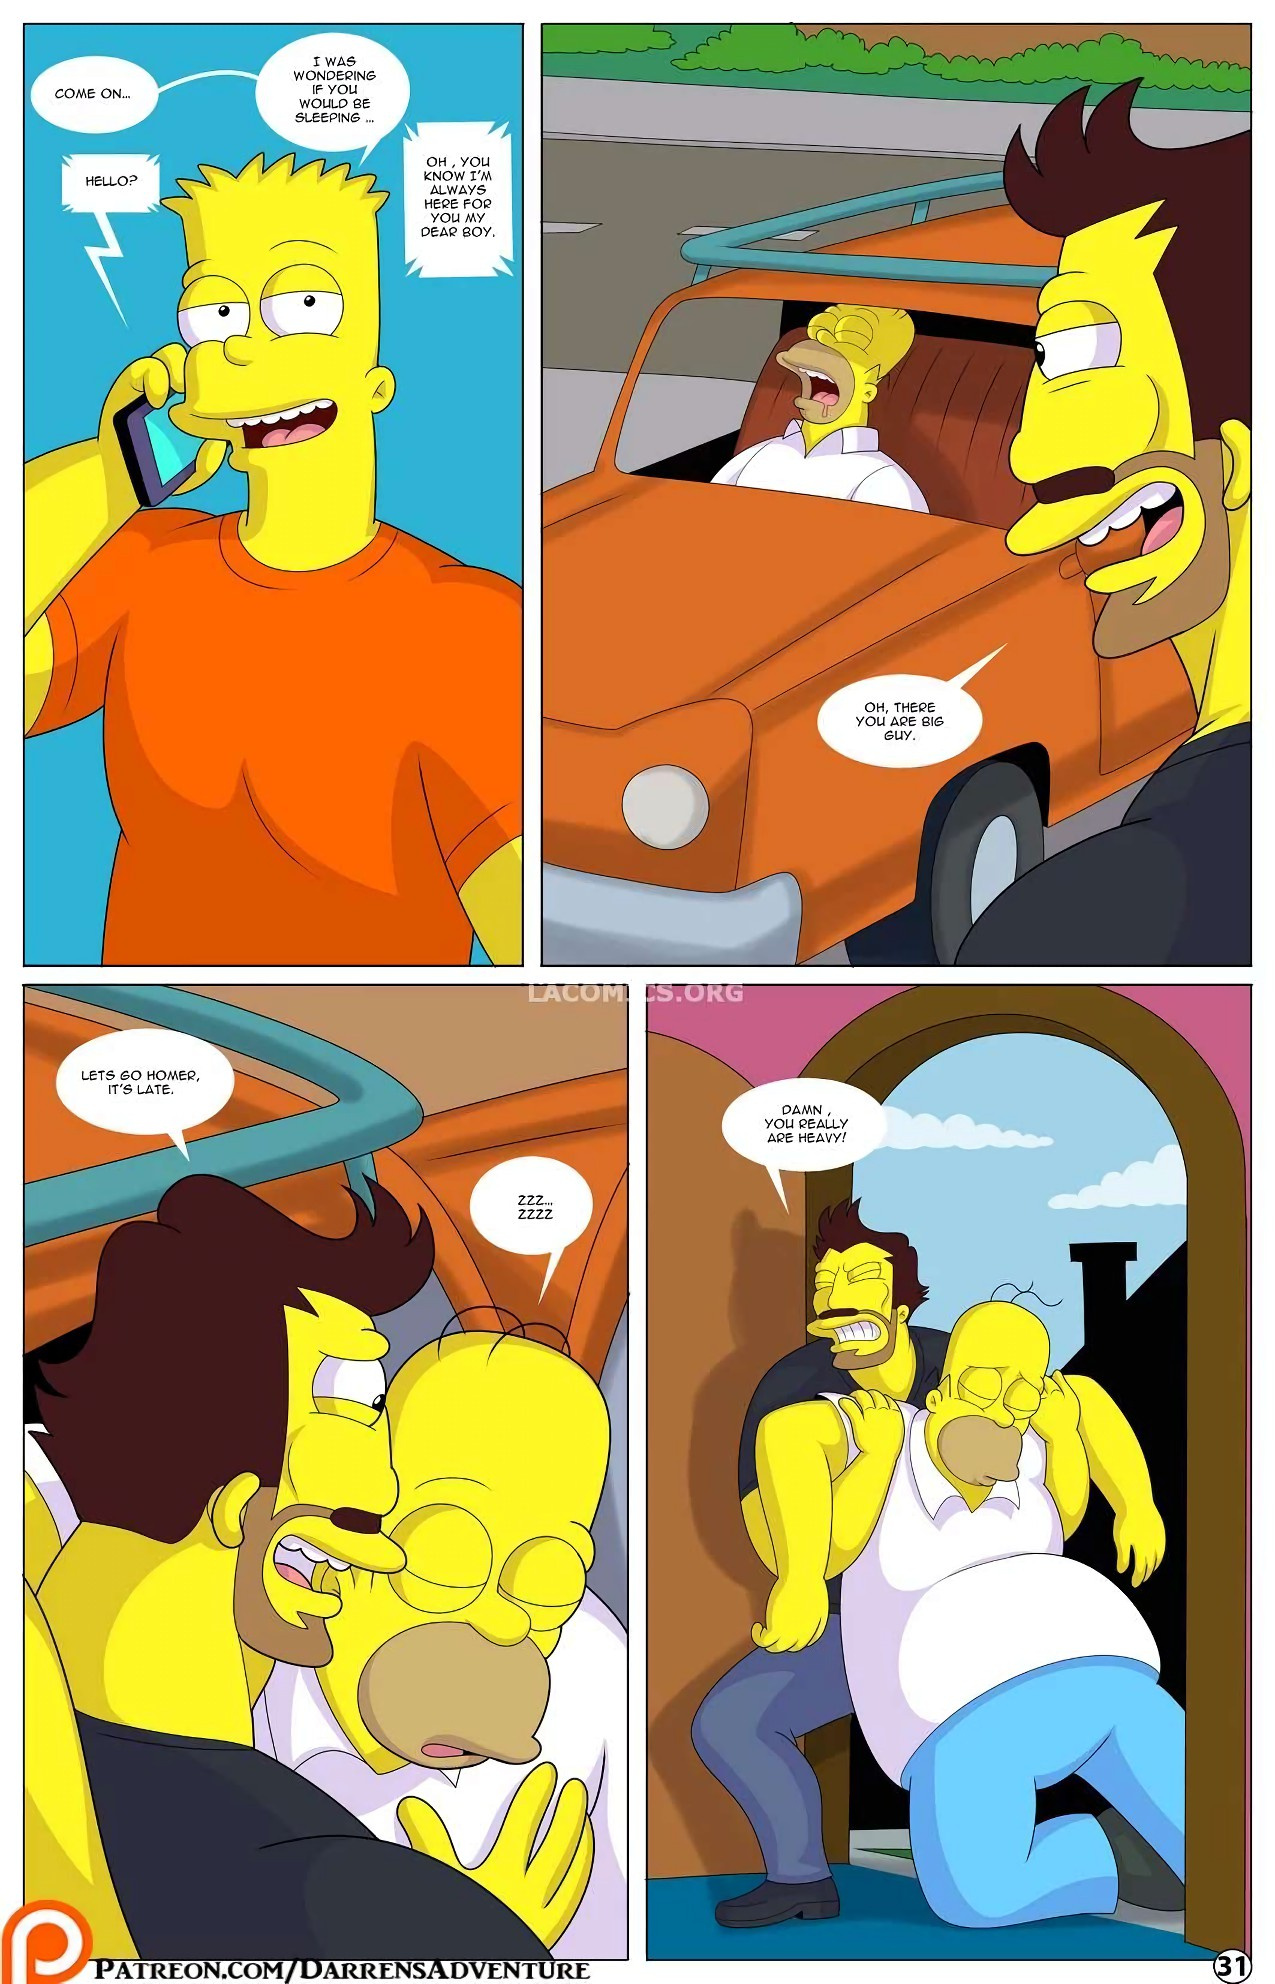 Darren's Adventure or Welcome To Springfield porn comics Oral sex, Anal Sex, Big Tits, Blowjob, Double Penetration, Group Sex, incest, Lesbians, Masturbation, Stockings, Straight, Titfuck